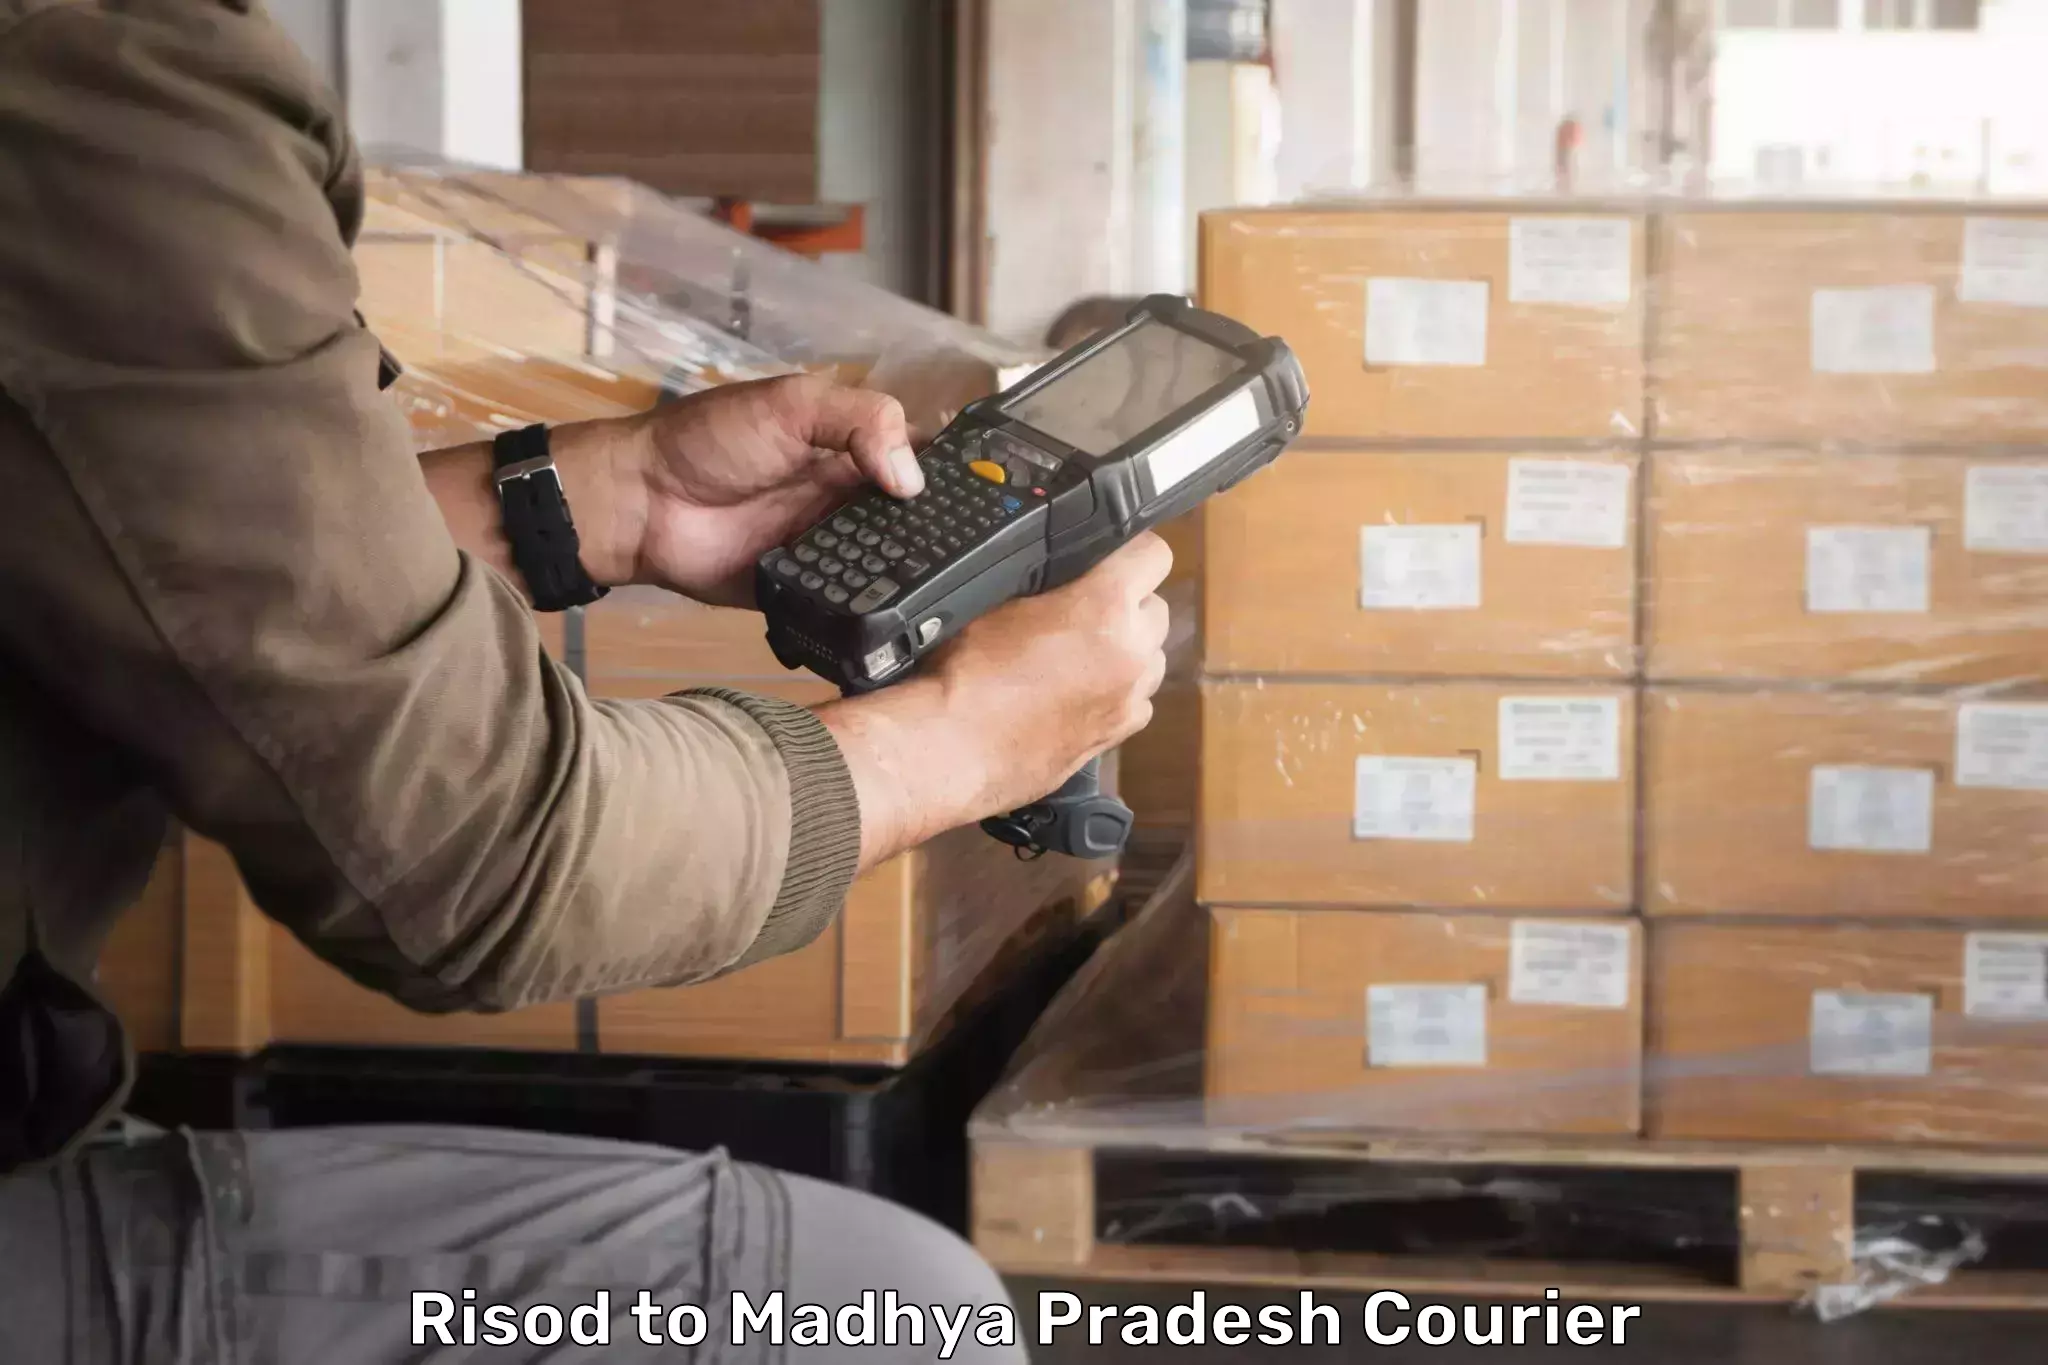 Large package courier Risod to Rajgarh